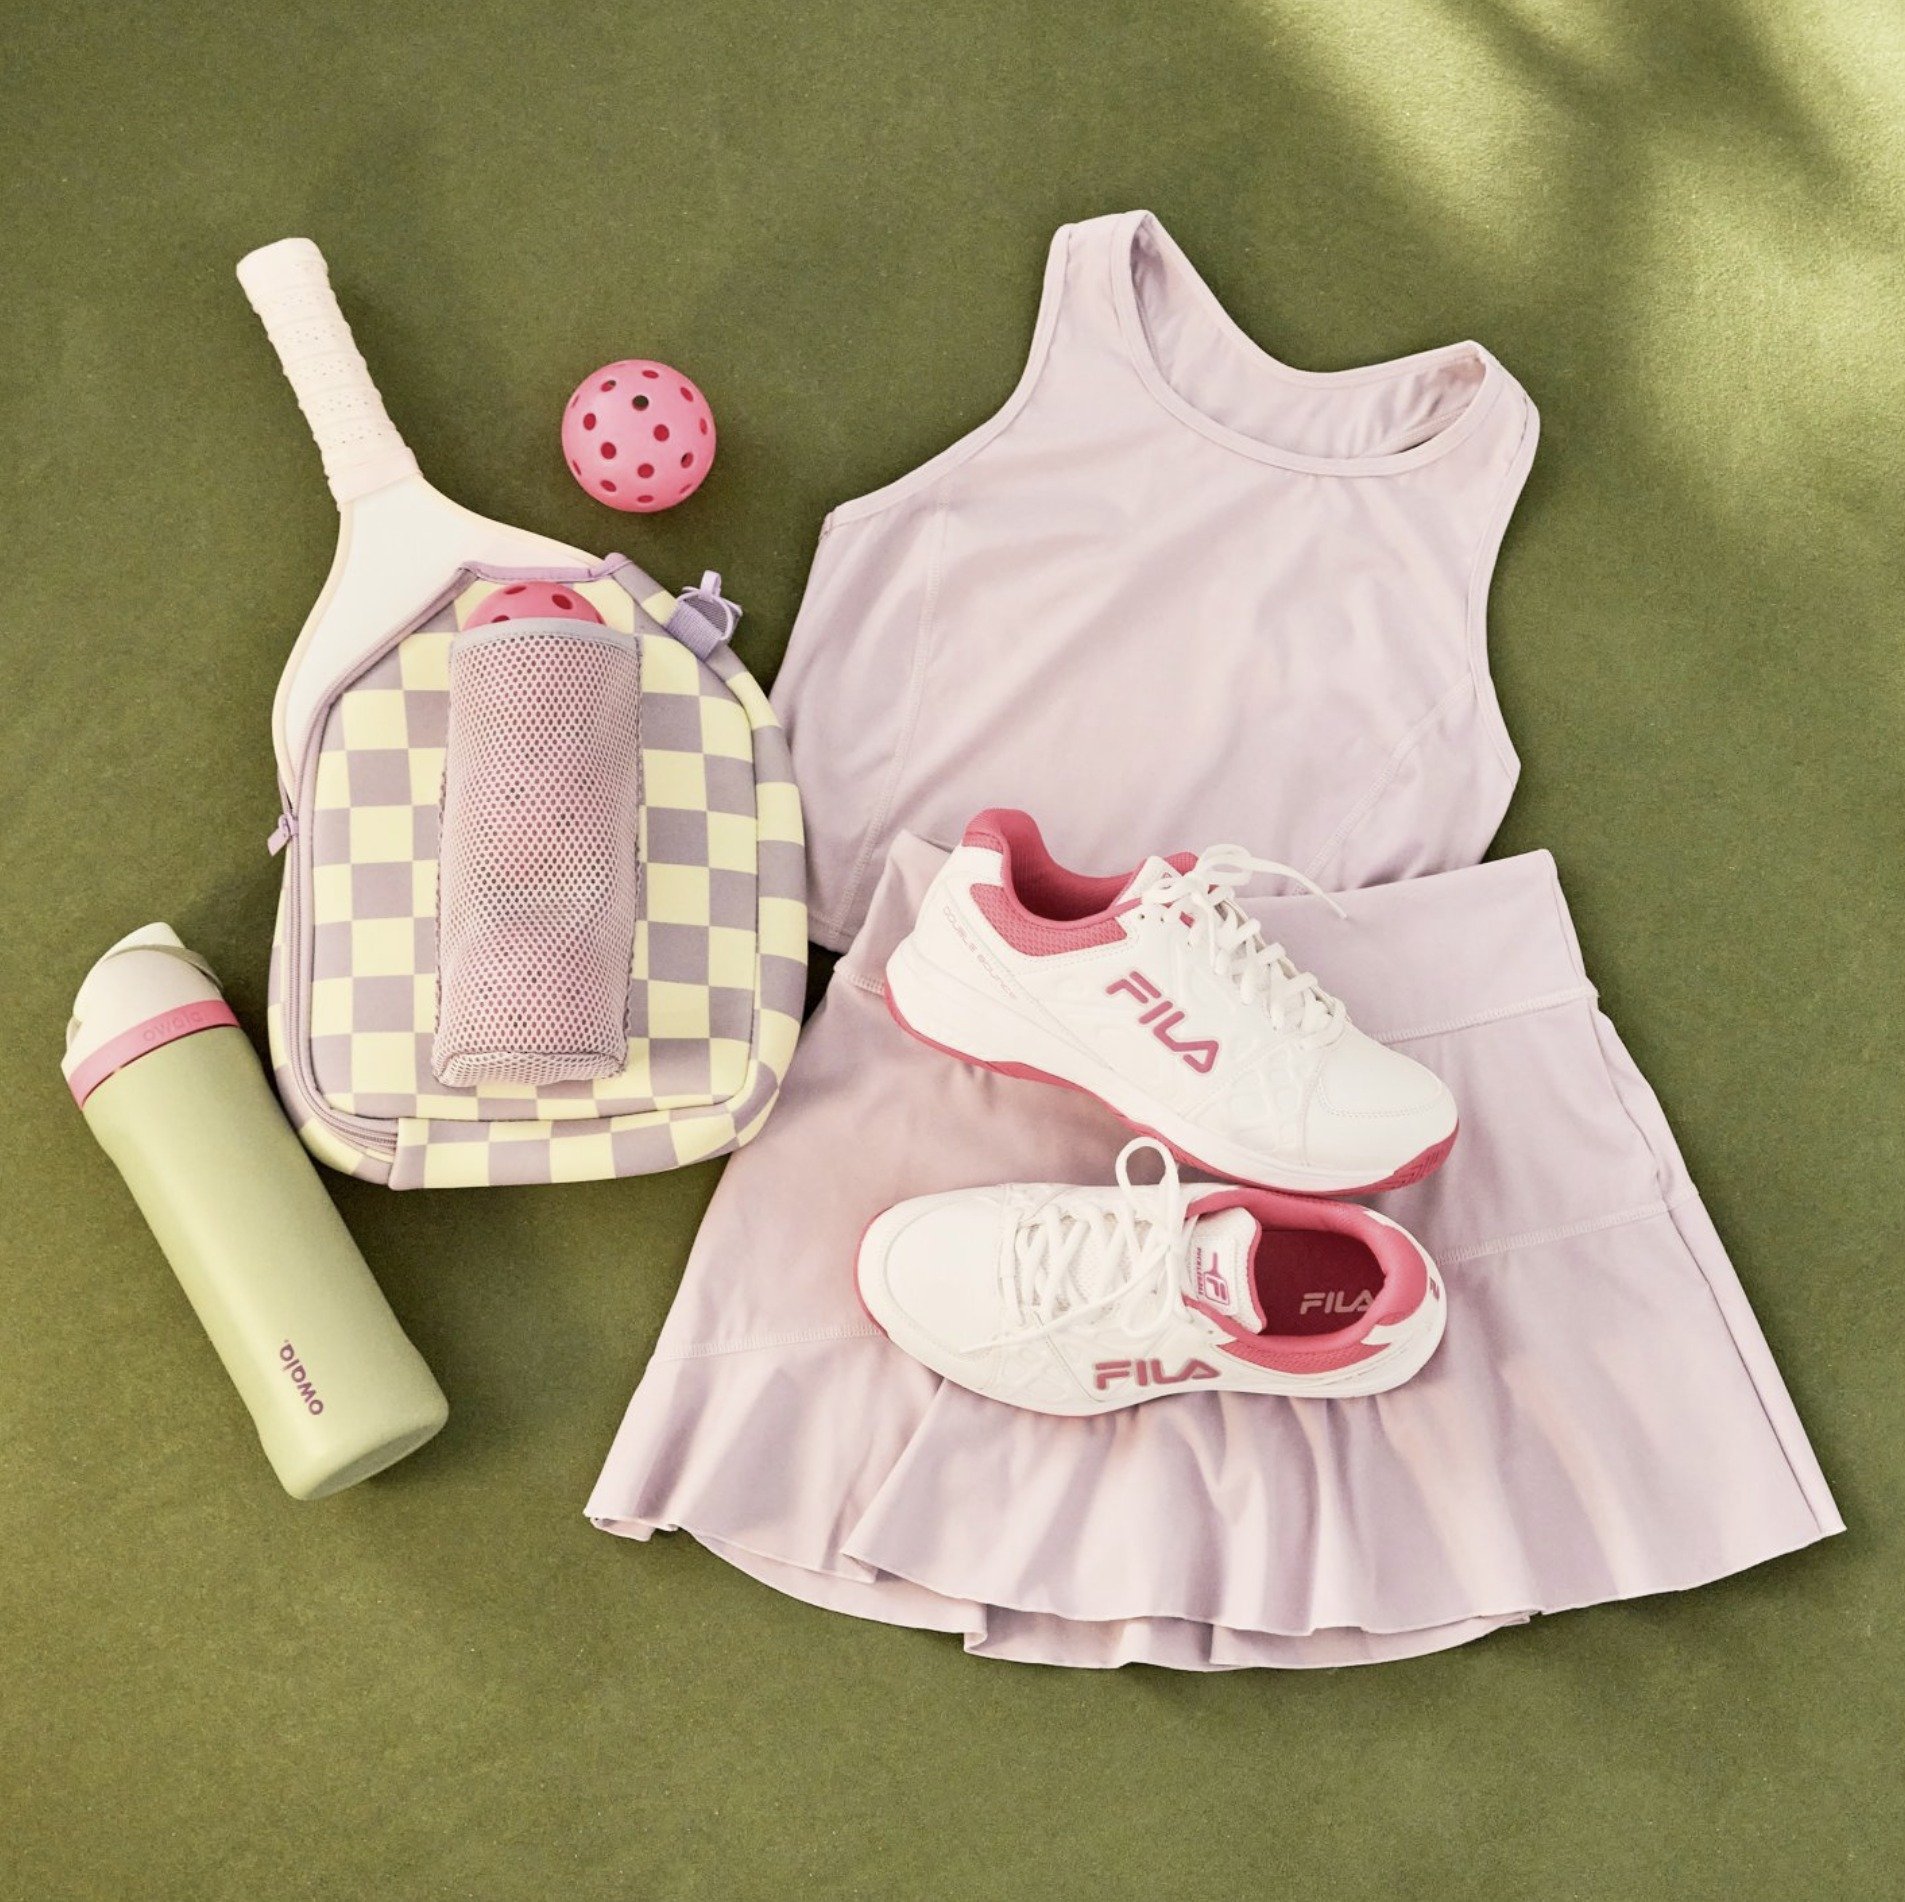 ☀️🎾 The sun is shining and pickleball matches are calling your name. Stop by DSW to gear up for pickleball season with the perfect shoes and more! 👟

#pickleball #shoes #DSW #pink #looks #greenwaystation #greenwayshopping #sun #play